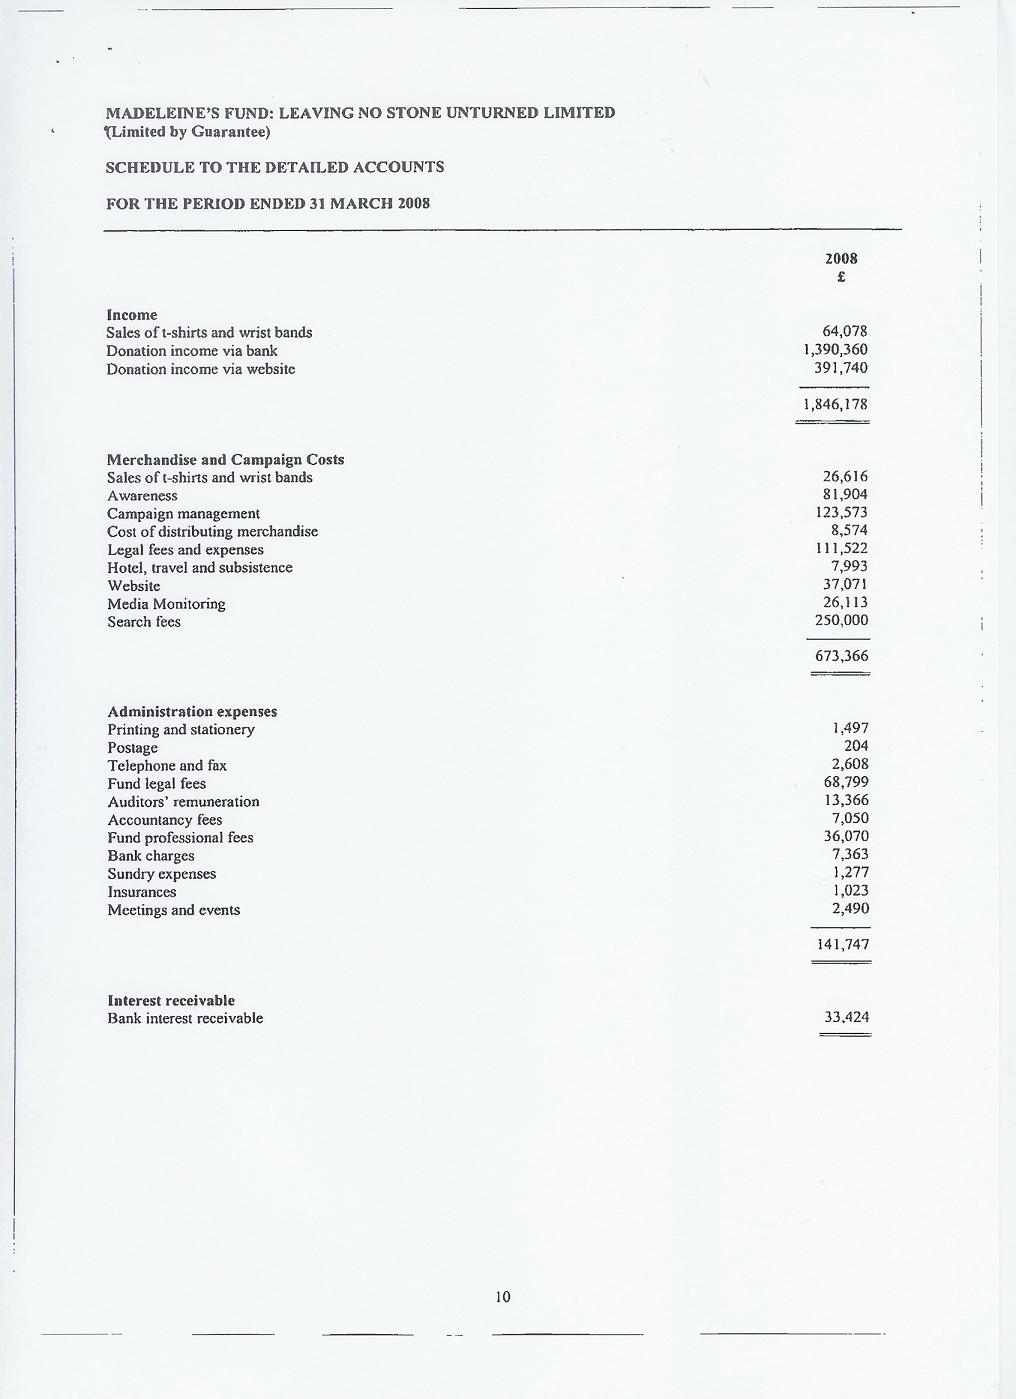 Madeleine's Fund accounts for year ending 31 March 2008, page 10